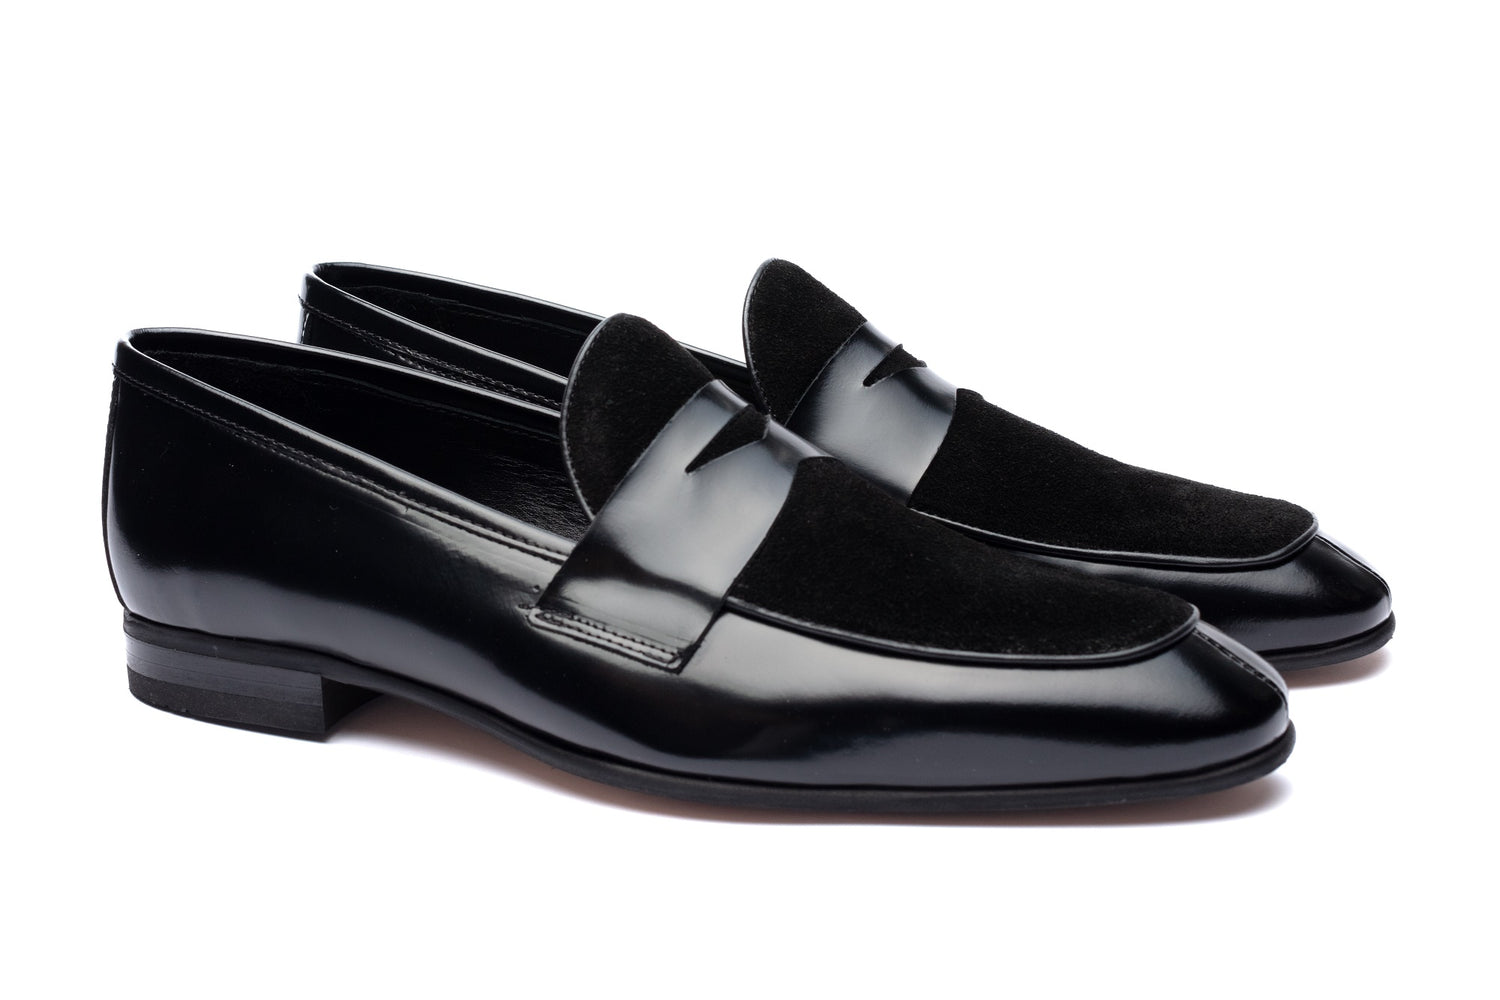 The Lenno Loafers - Loafers by Urbbana